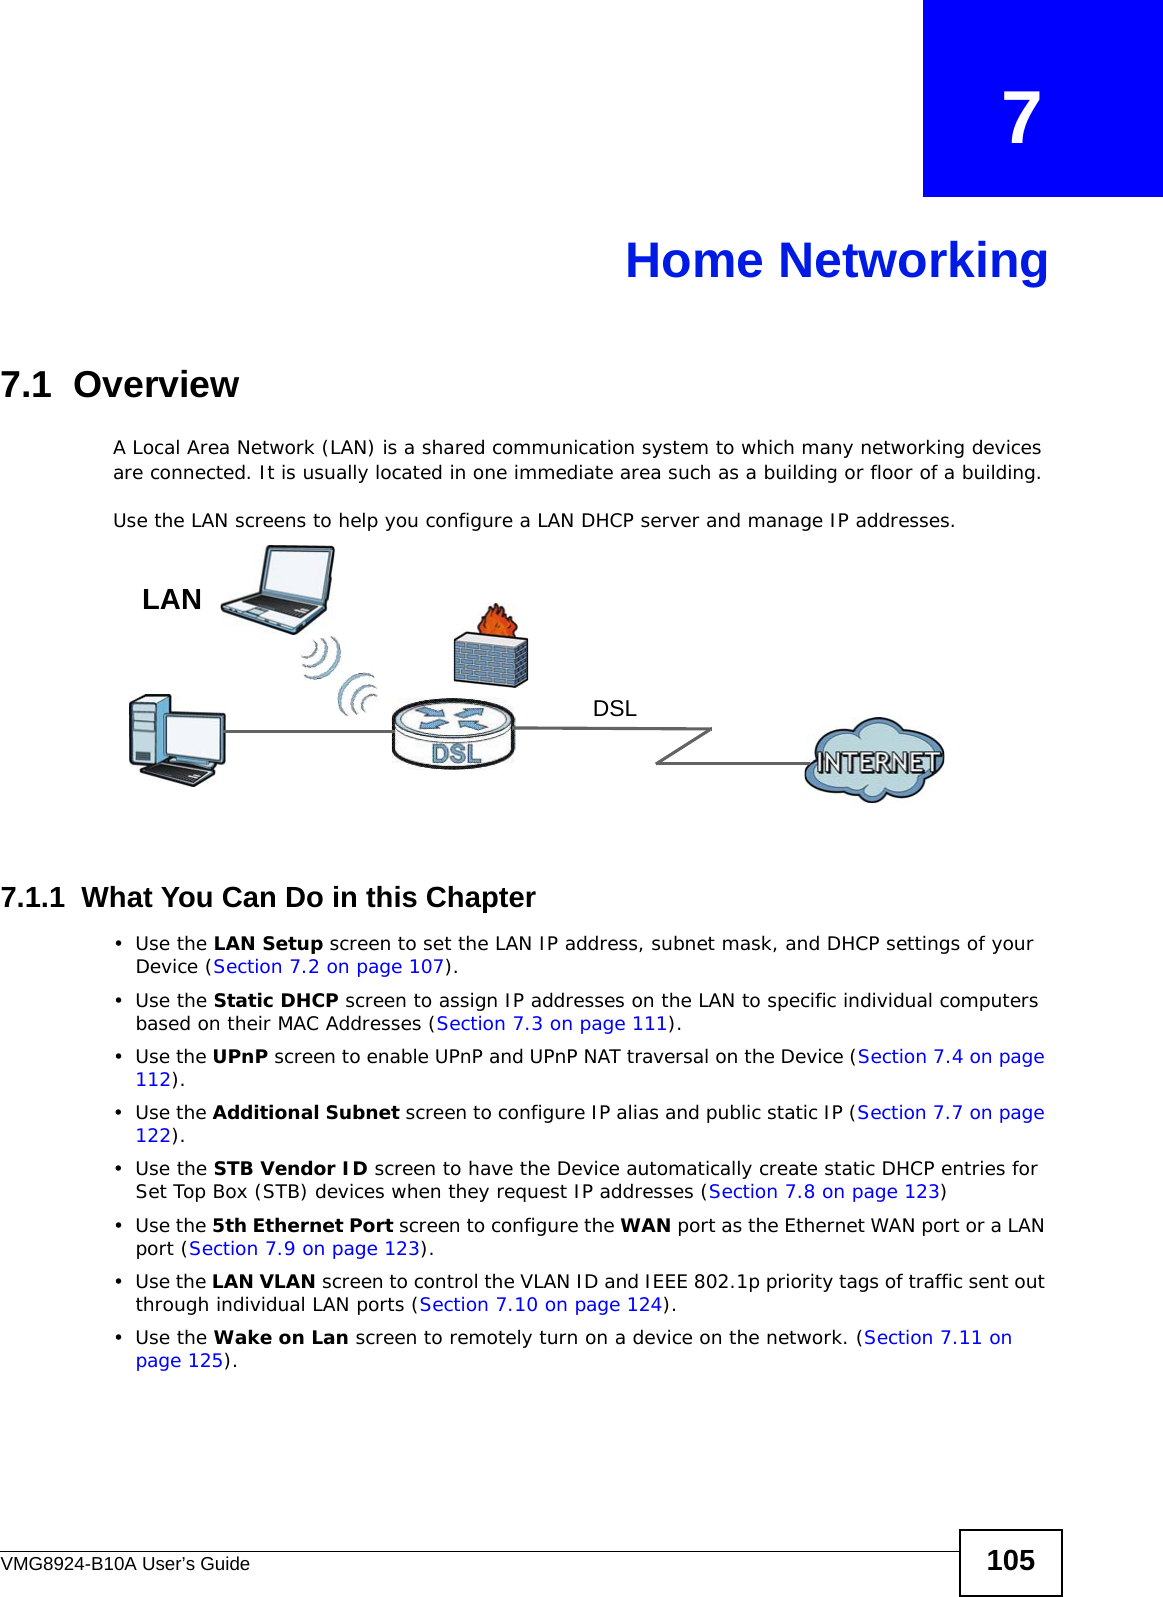 VMG8924-B10A User’s Guide 105CHAPTER   7Home Networking7.1  OverviewA Local Area Network (LAN) is a shared communication system to which many networking devices are connected. It is usually located in one immediate area such as a building or floor of a building.Use the LAN screens to help you configure a LAN DHCP server and manage IP addresses.7.1.1  What You Can Do in this Chapter•Use the LAN Setup screen to set the LAN IP address, subnet mask, and DHCP settings of your Device (Section 7.2 on page 107).•Use the Static DHCP screen to assign IP addresses on the LAN to specific individual computers based on their MAC Addresses (Section 7.3 on page 111). •Use the UPnP screen to enable UPnP and UPnP NAT traversal on the Device (Section 7.4 on page 112).•Use the Additional Subnet screen to configure IP alias and public static IP (Section 7.7 on page 122).•Use the STB Vendor ID screen to have the Device automatically create static DHCP entries for Set Top Box (STB) devices when they request IP addresses (Section 7.8 on page 123)•Use the 5th Ethernet Port screen to configure the WAN port as the Ethernet WAN port or a LAN port (Section 7.9 on page 123).•Use the LAN VLAN screen to control the VLAN ID and IEEE 802.1p priority tags of traffic sent out through individual LAN ports (Section 7.10 on page 124).•Use the Wake on Lan screen to remotely turn on a device on the network. (Section 7.11 on page 125).DSLLAN